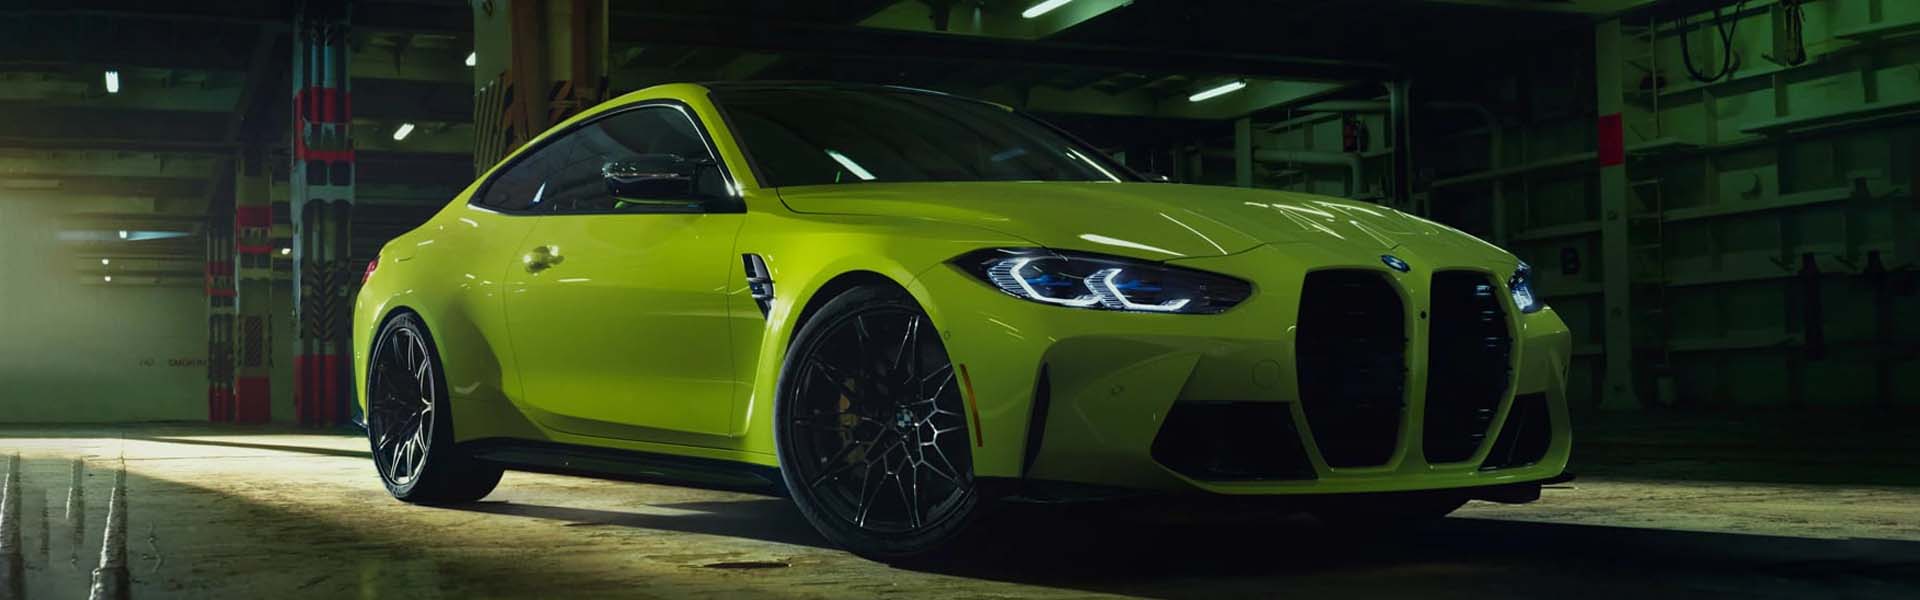 5 Impressive Features of the 2023 BMW M4 | Valley Auto World BMW